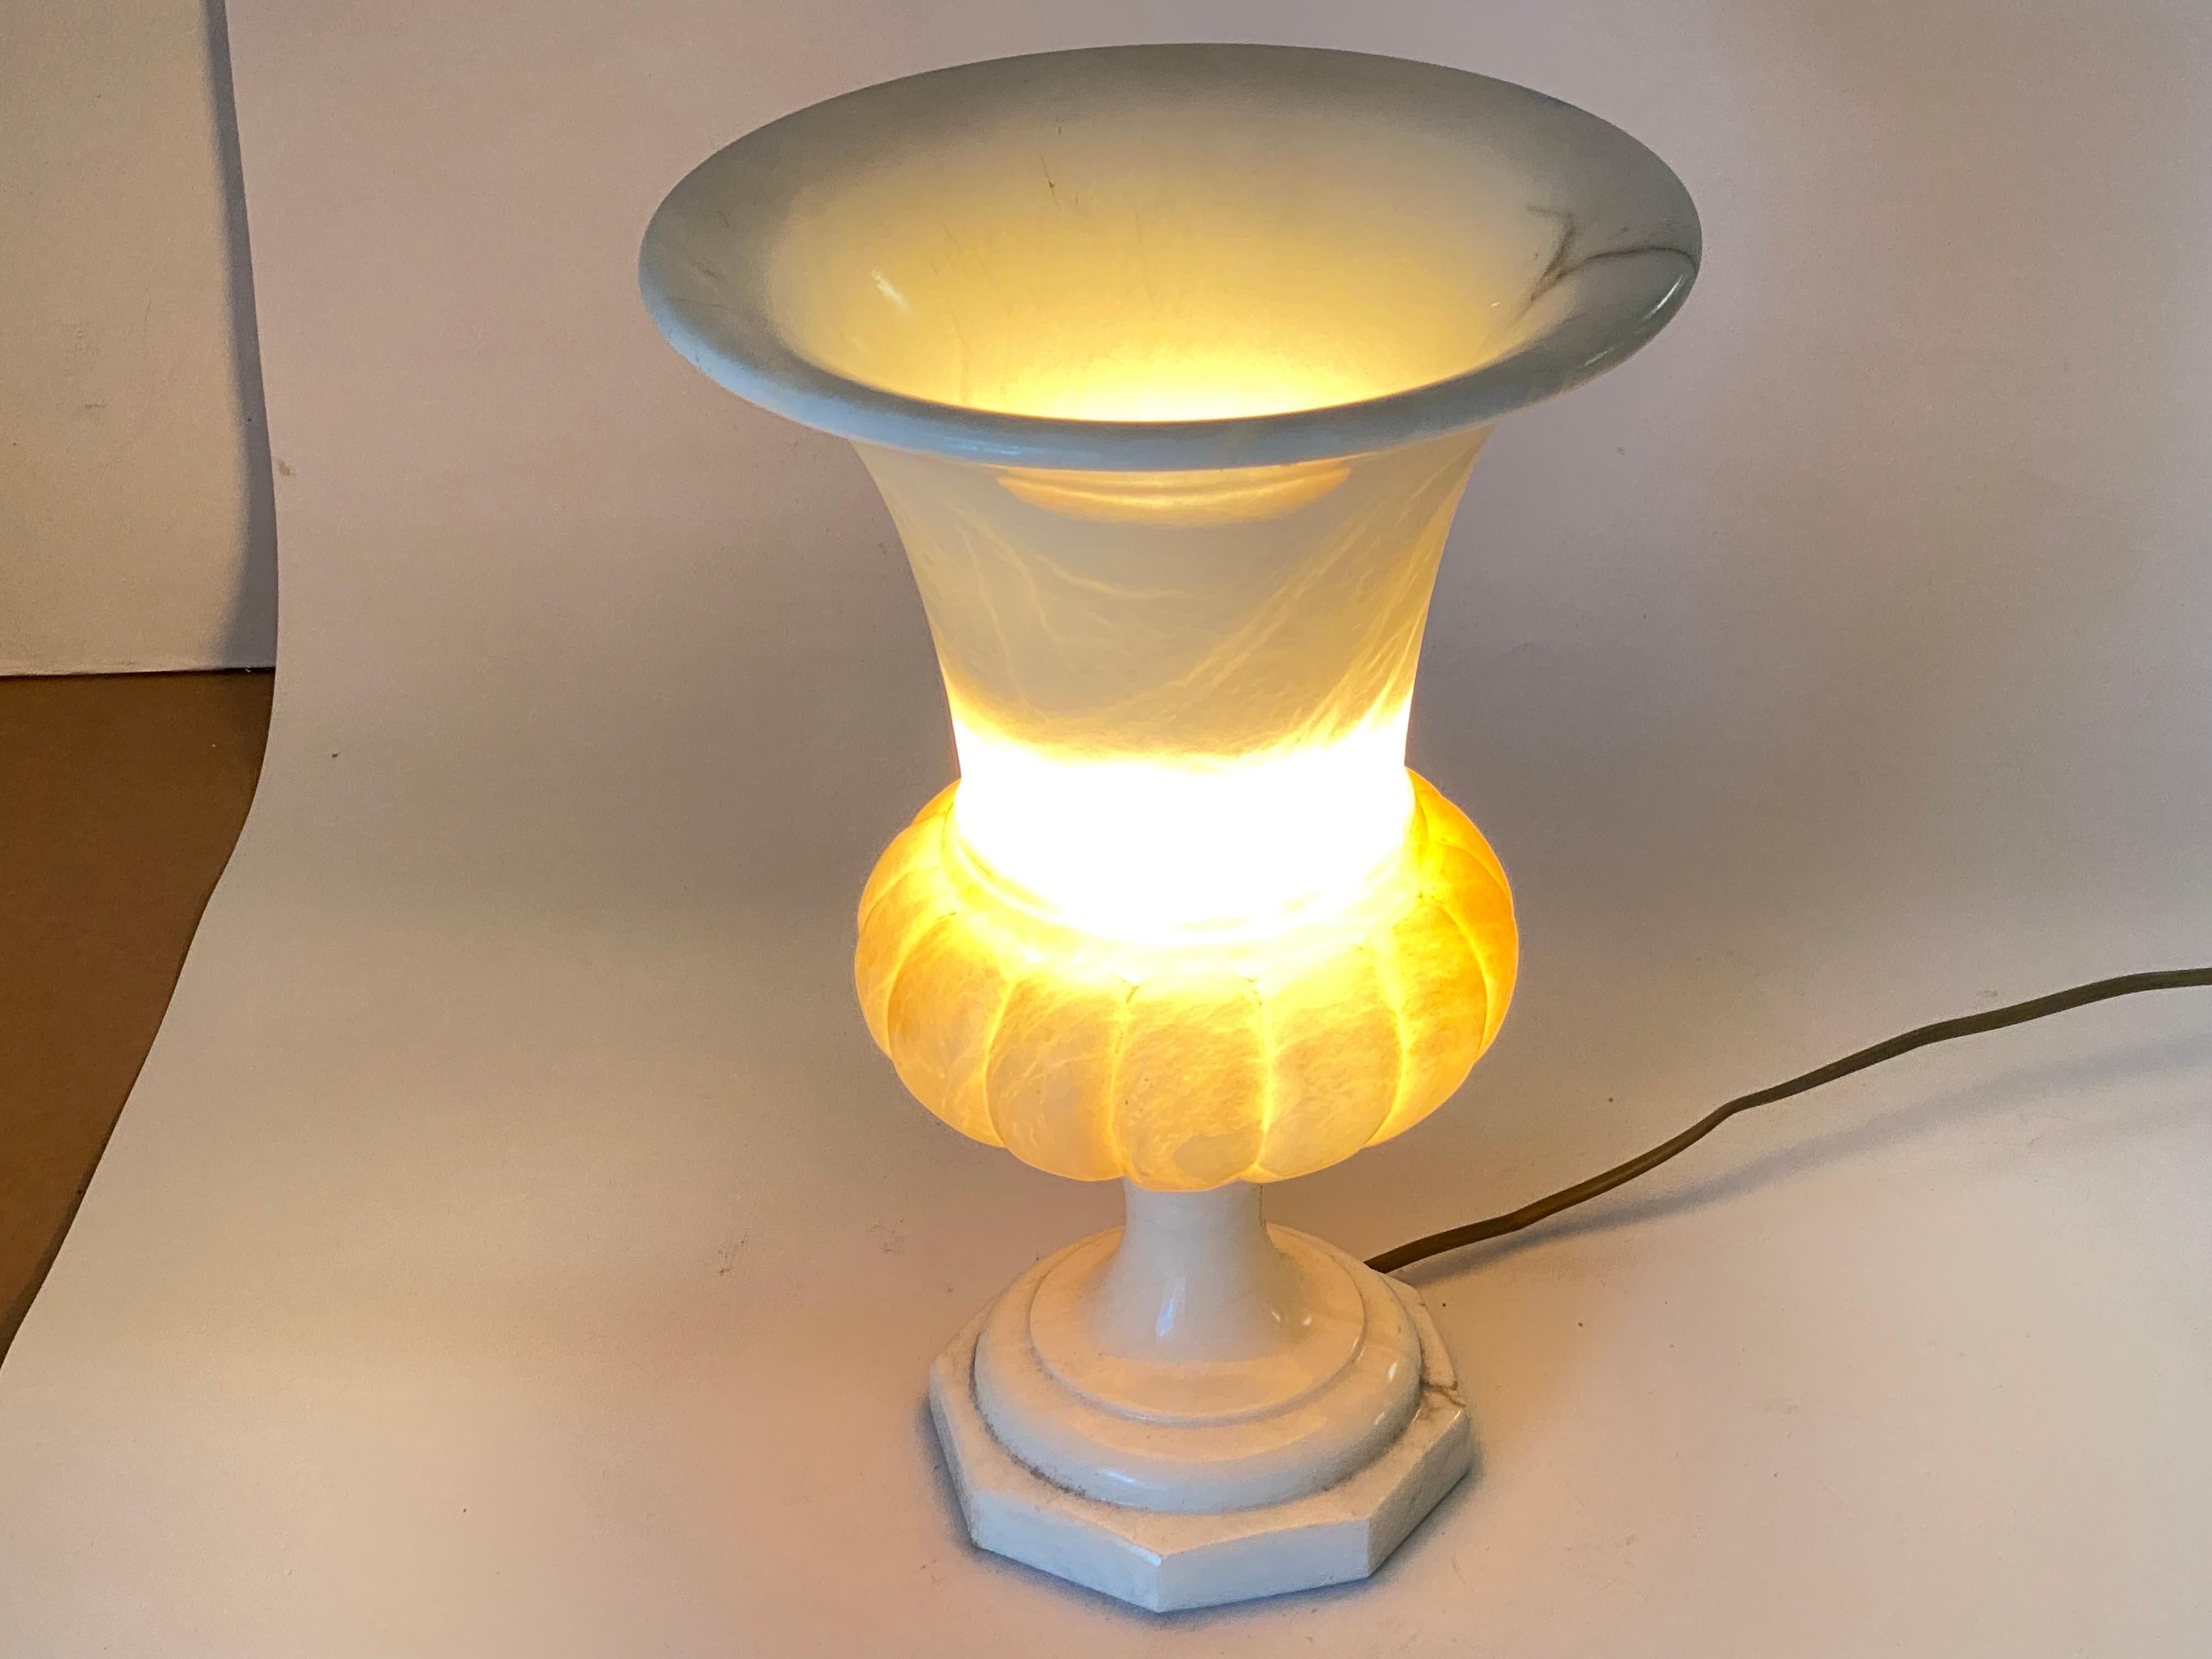 Sculptural alabaster Art Deco period urn table lamp with neoclassical design, France, 1940s.
This elegant carved alabaster neoclassical 'uplighter' urn lamp will be a nice addition placed in a console table or side table.
It provides a charming